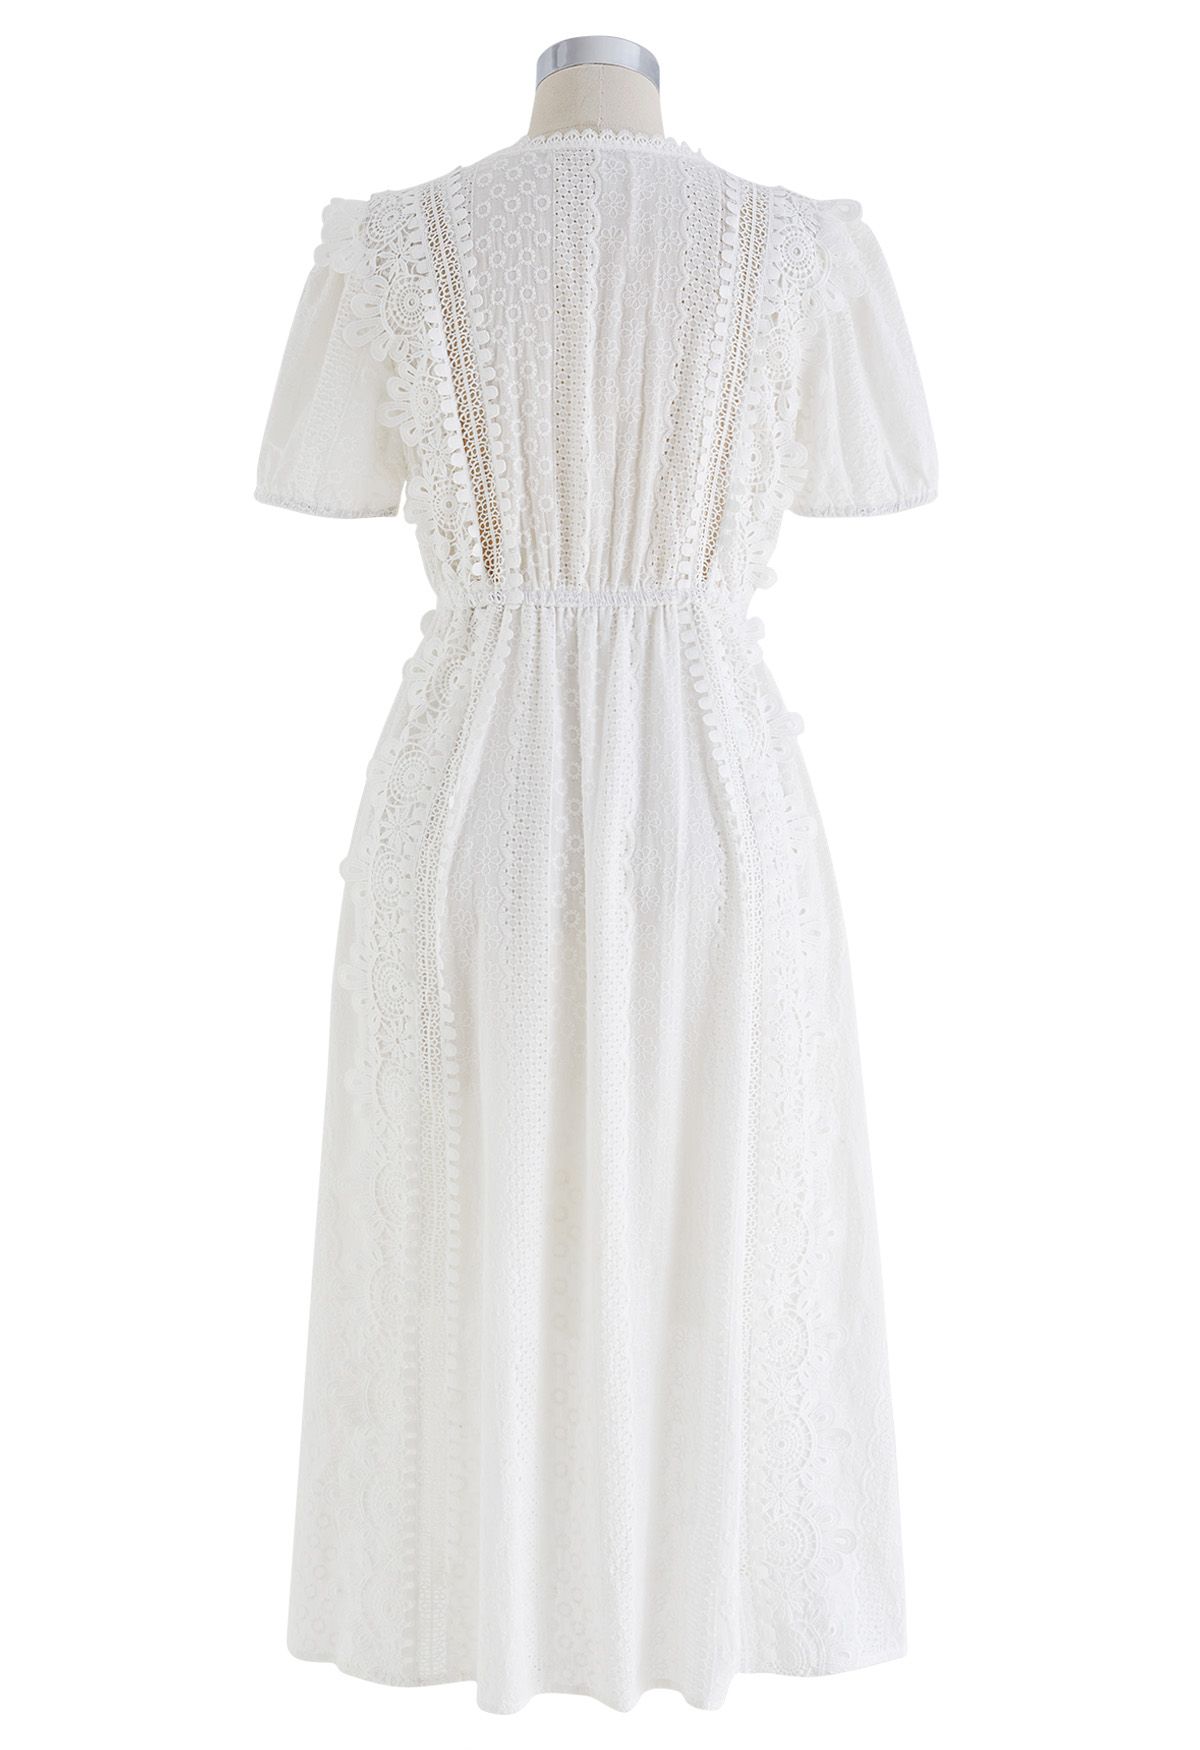 Eyelet Embroidered Cutwork Lace Trim Button Down Dress